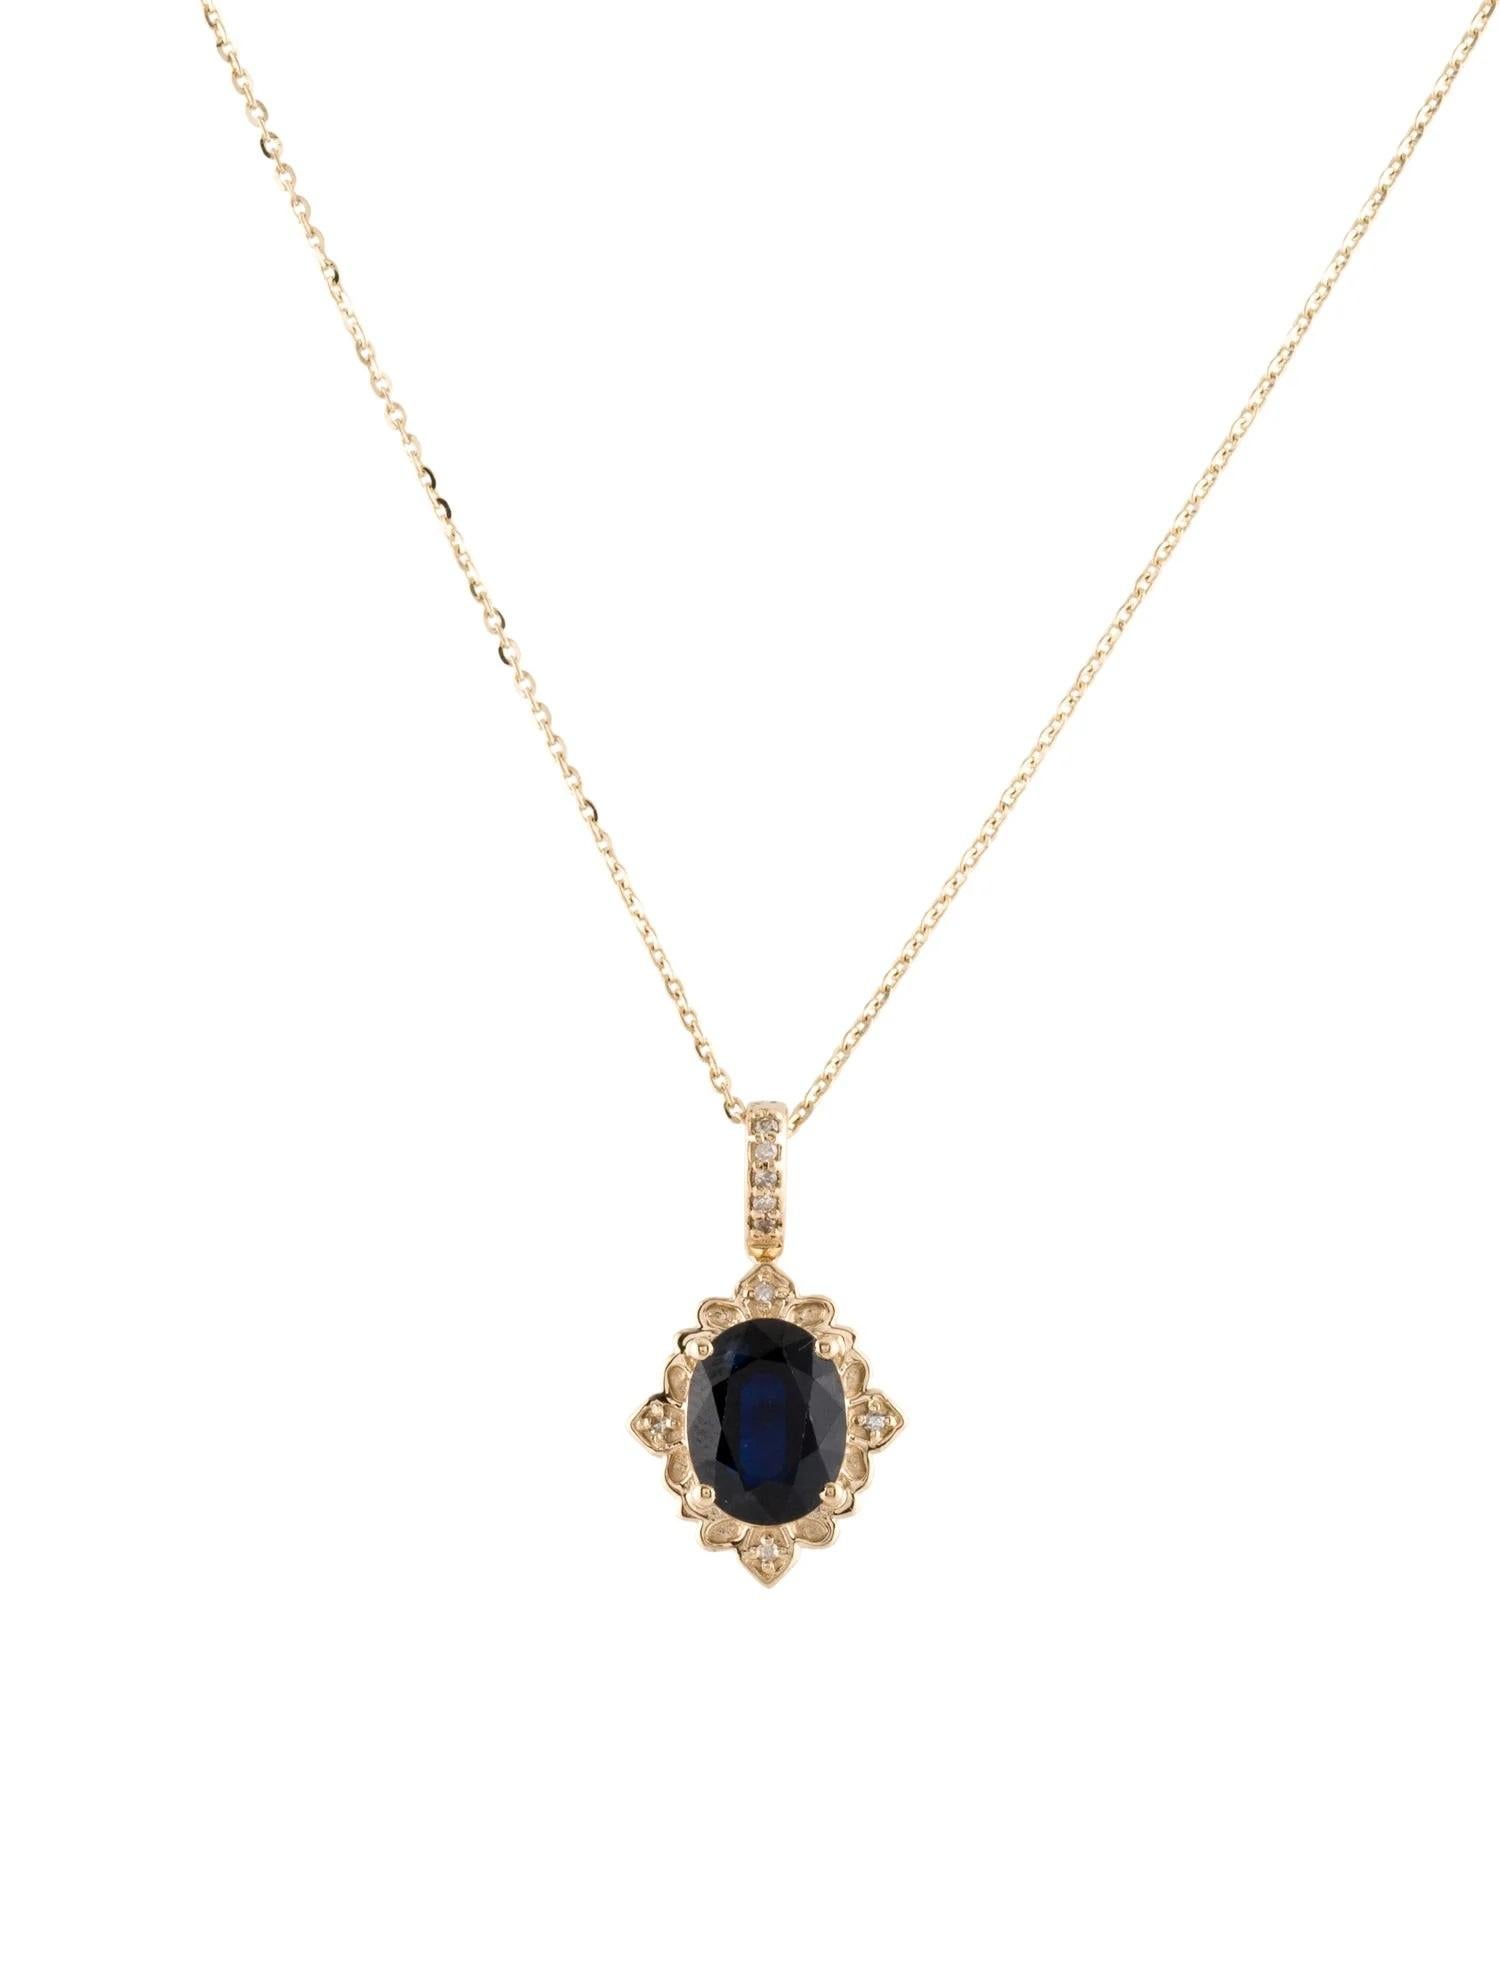 Oval Cut 14K Sapphire & Diamond Pendant Necklace  Yellow Gold  Oval Faceted Sapphire For Sale